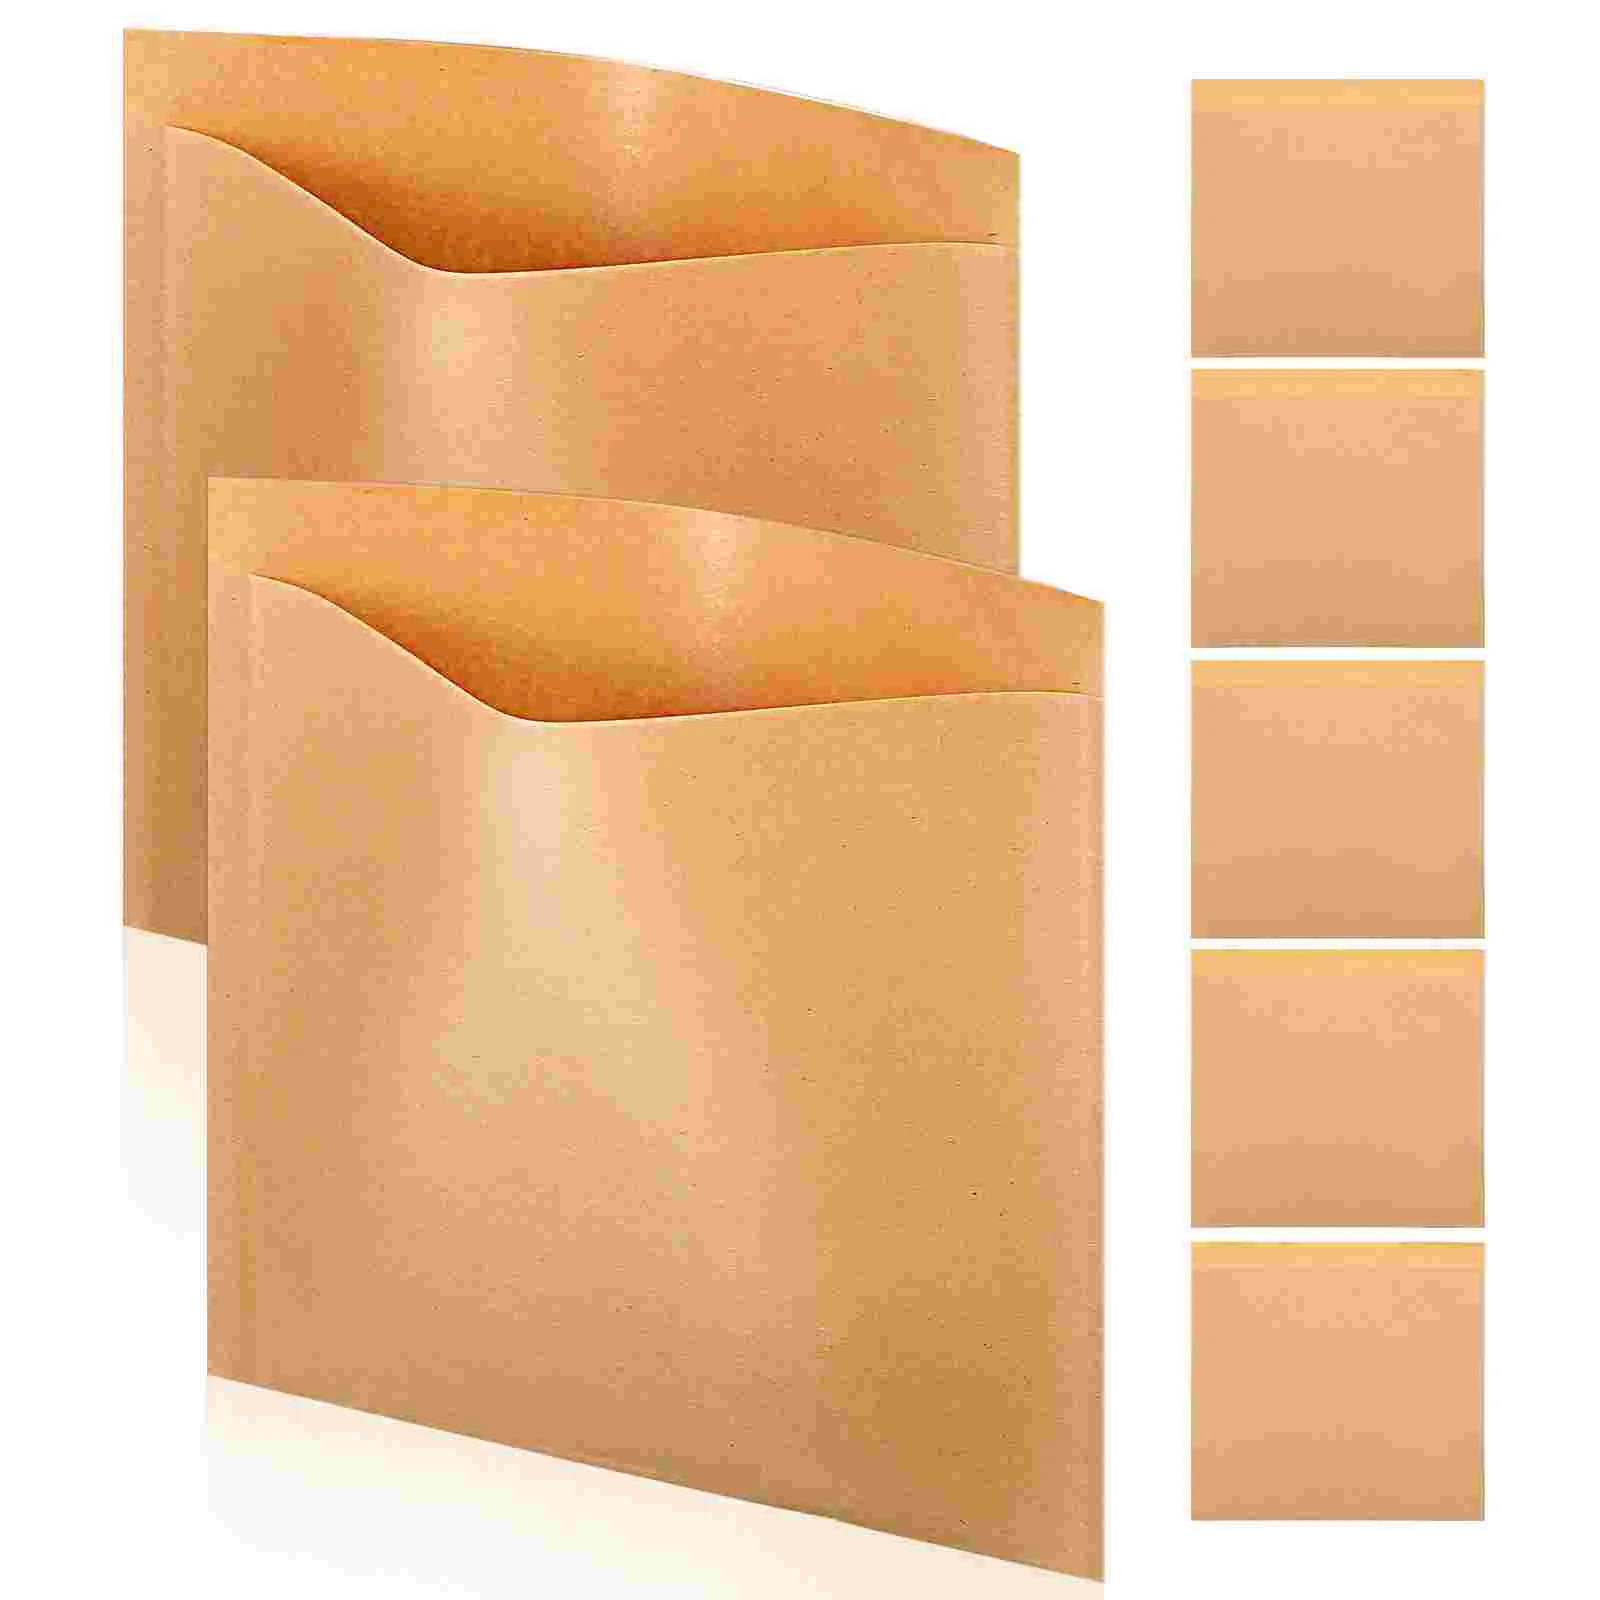 

200 Pcs Greaseproof Paper Snack Bags Treat Sandwich Food Baking Coated Candy Grease- Resistant Brown Gift